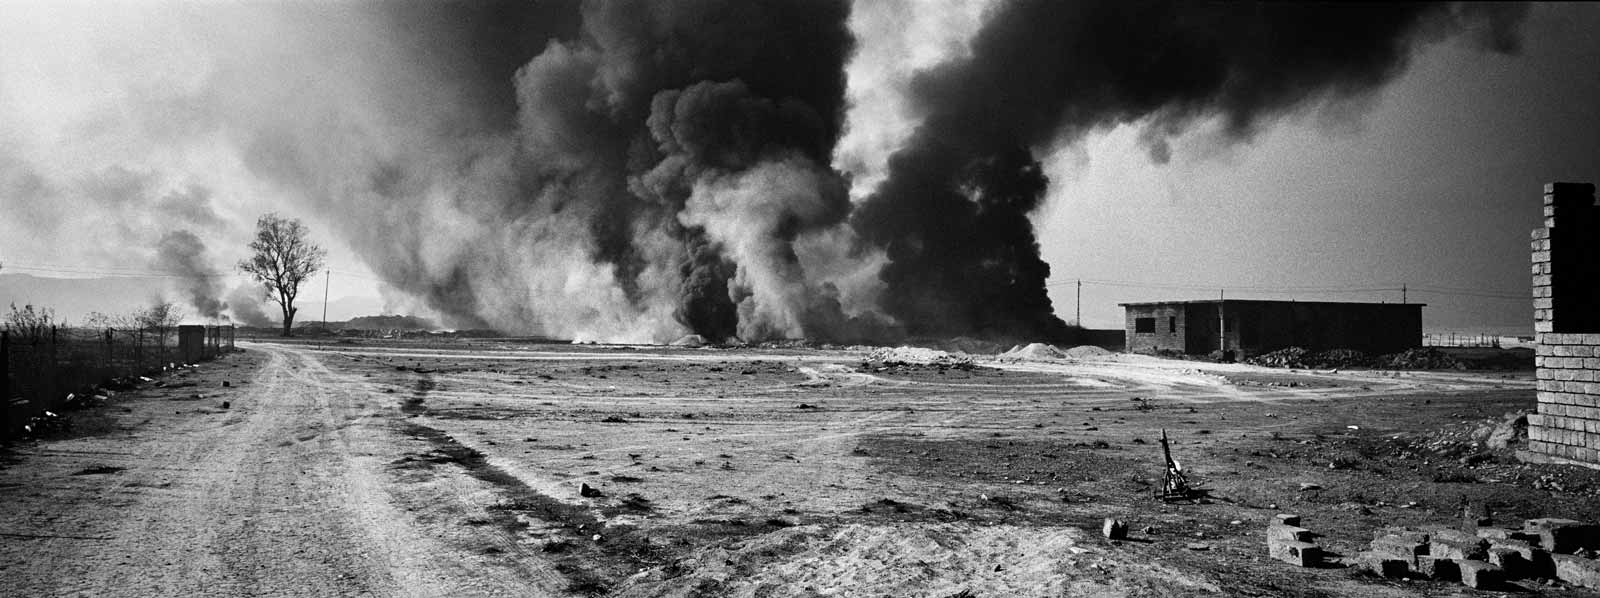 Smoke from fires at the oil fields around Qayyarah, a city southeast of Mosul, set alight by ISIS fighters in an effort to prevent coalition airstrikes, 2016